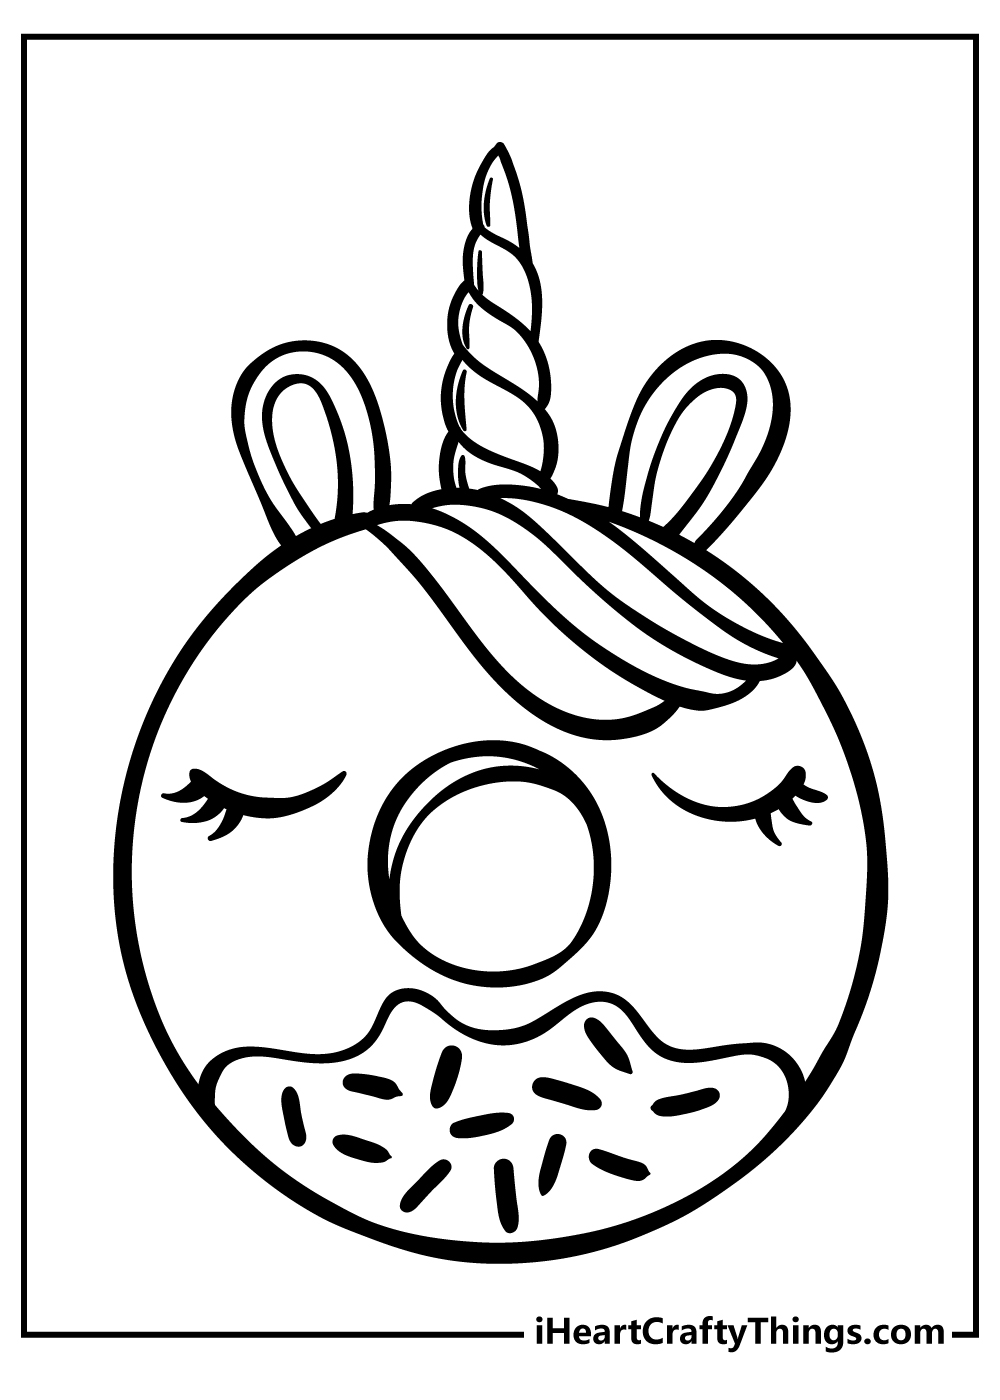 Donut coloring pages free printables